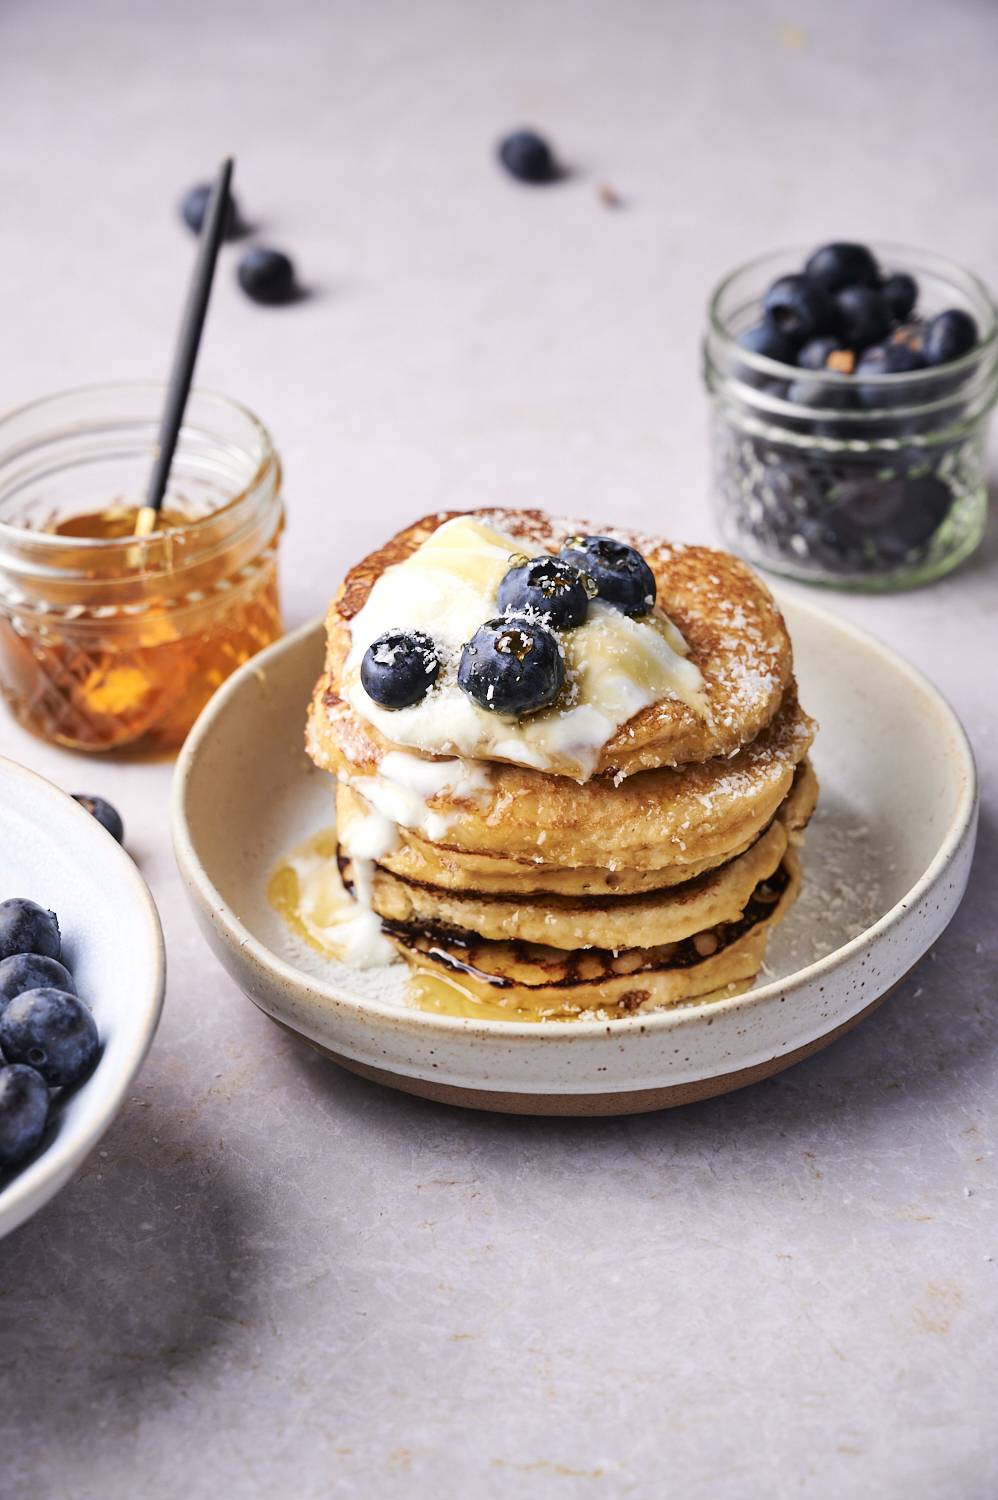 Keto almond flour pancakes stacked on a plate with plain yogurt, blueberries, and honey.